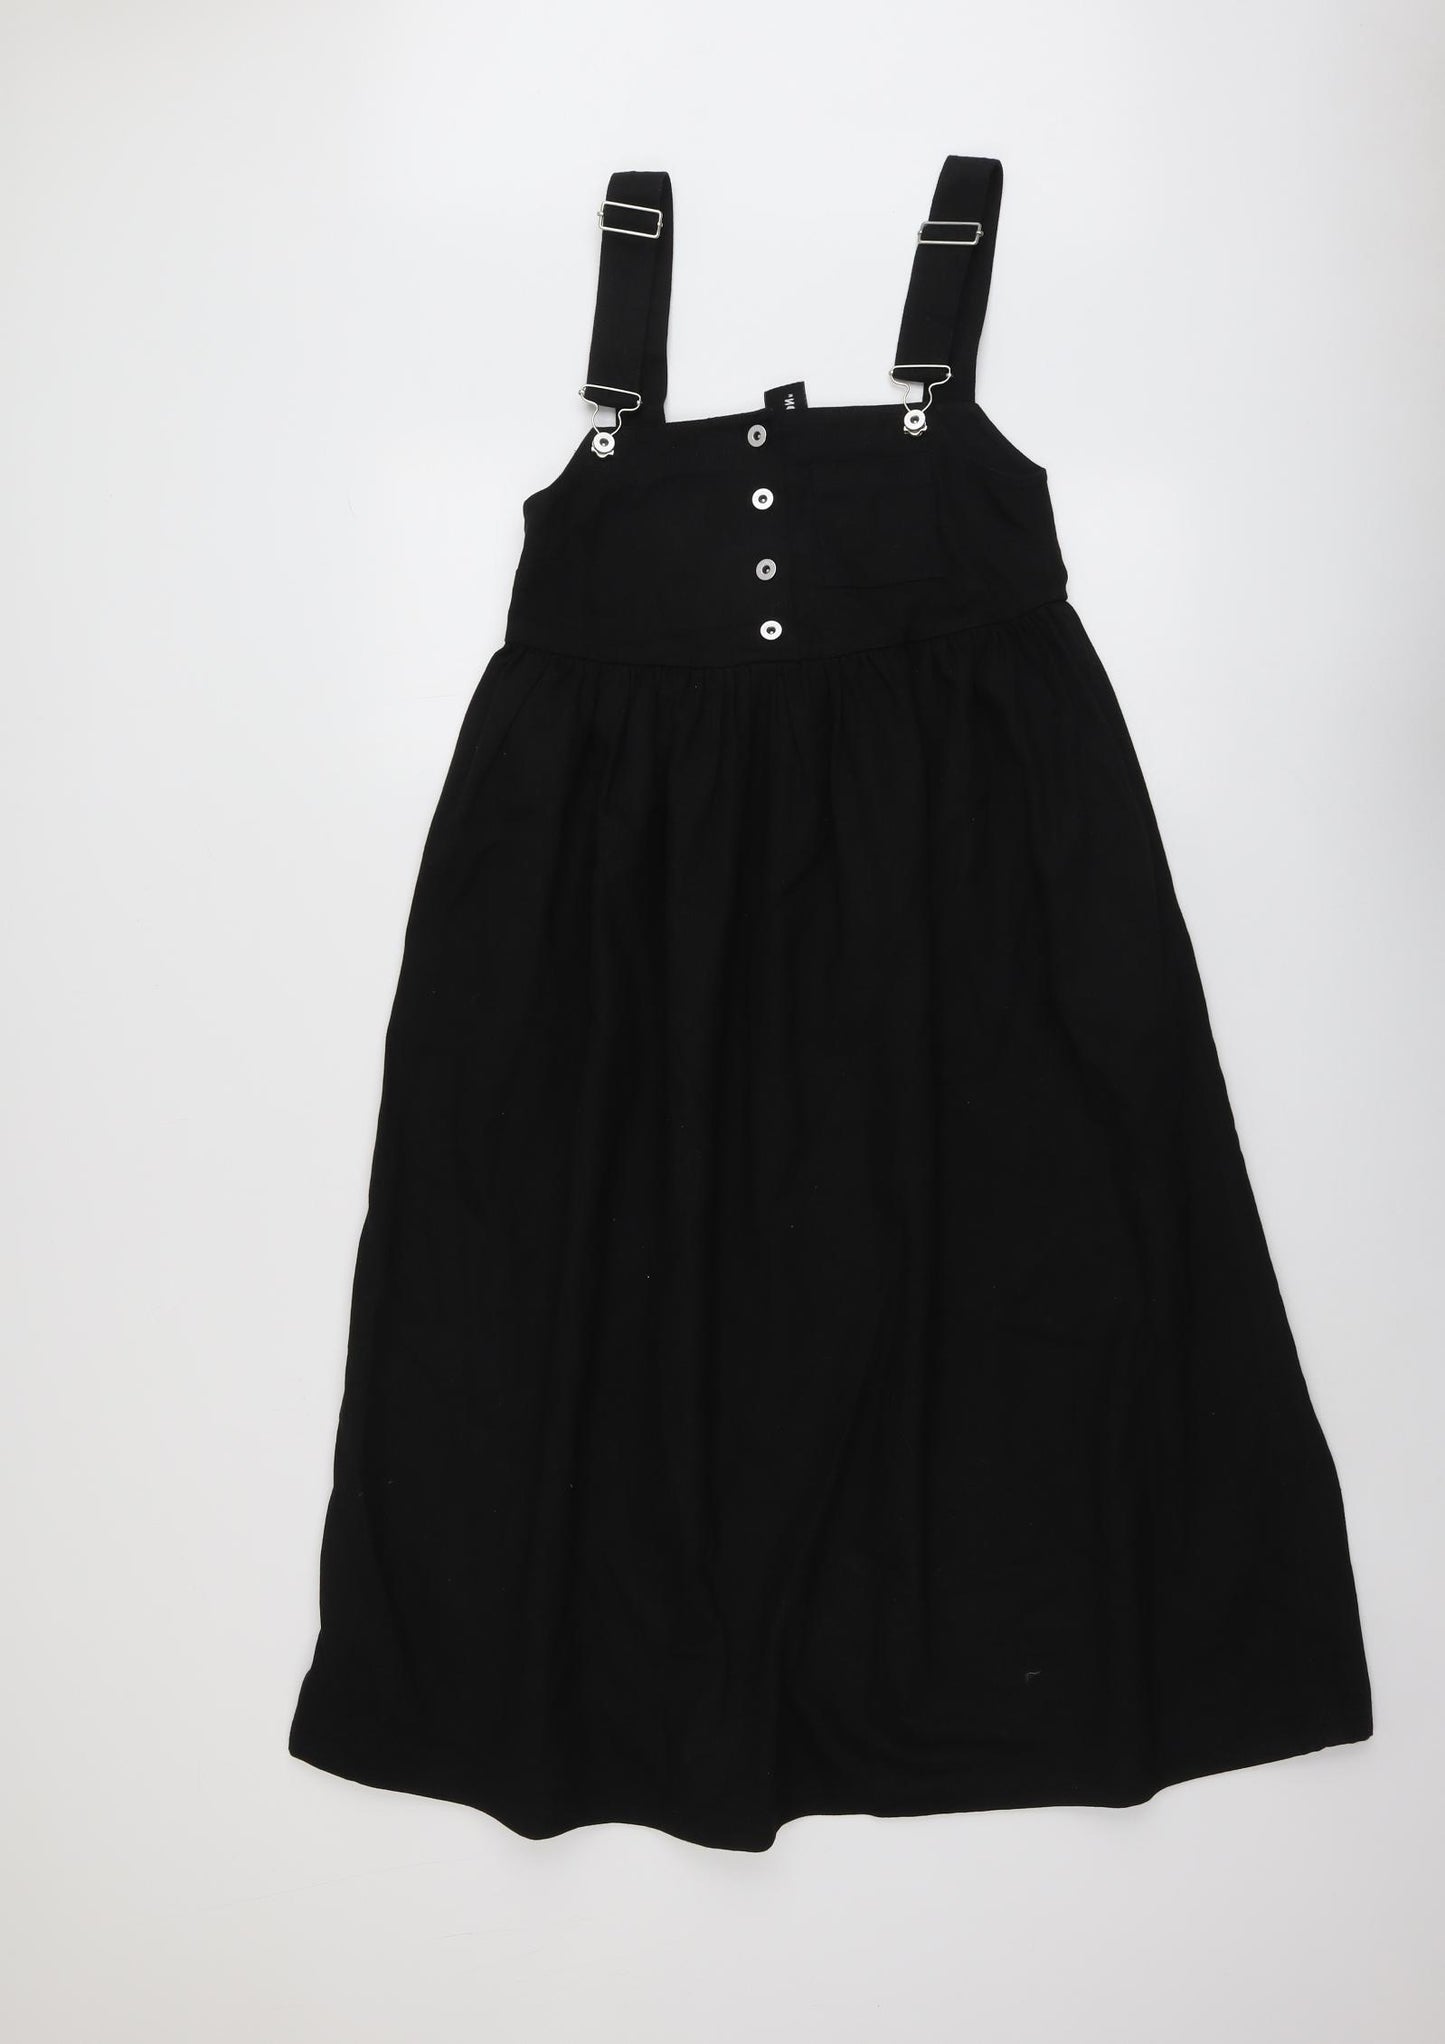 COLLUSION Womens Black Cotton Pinafore/Dungaree Dress Size 6 Square Neck Buckle